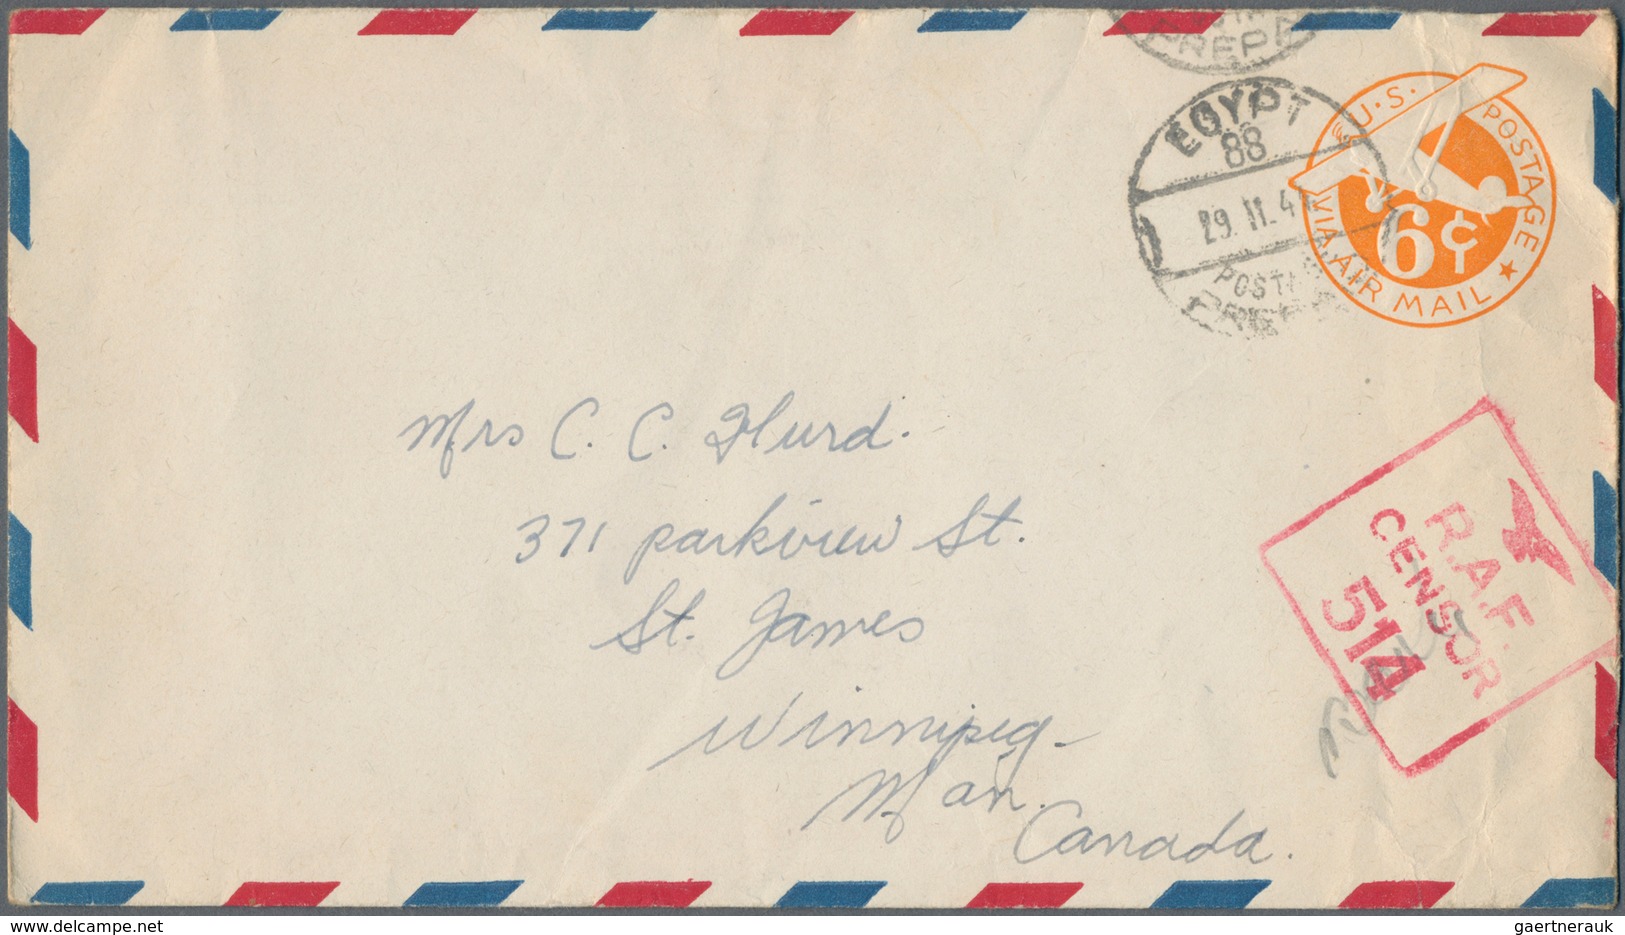 Kanada: 1941/45 holding of 450 cards, letters and postal stationeries, field post, maritime mail, ce